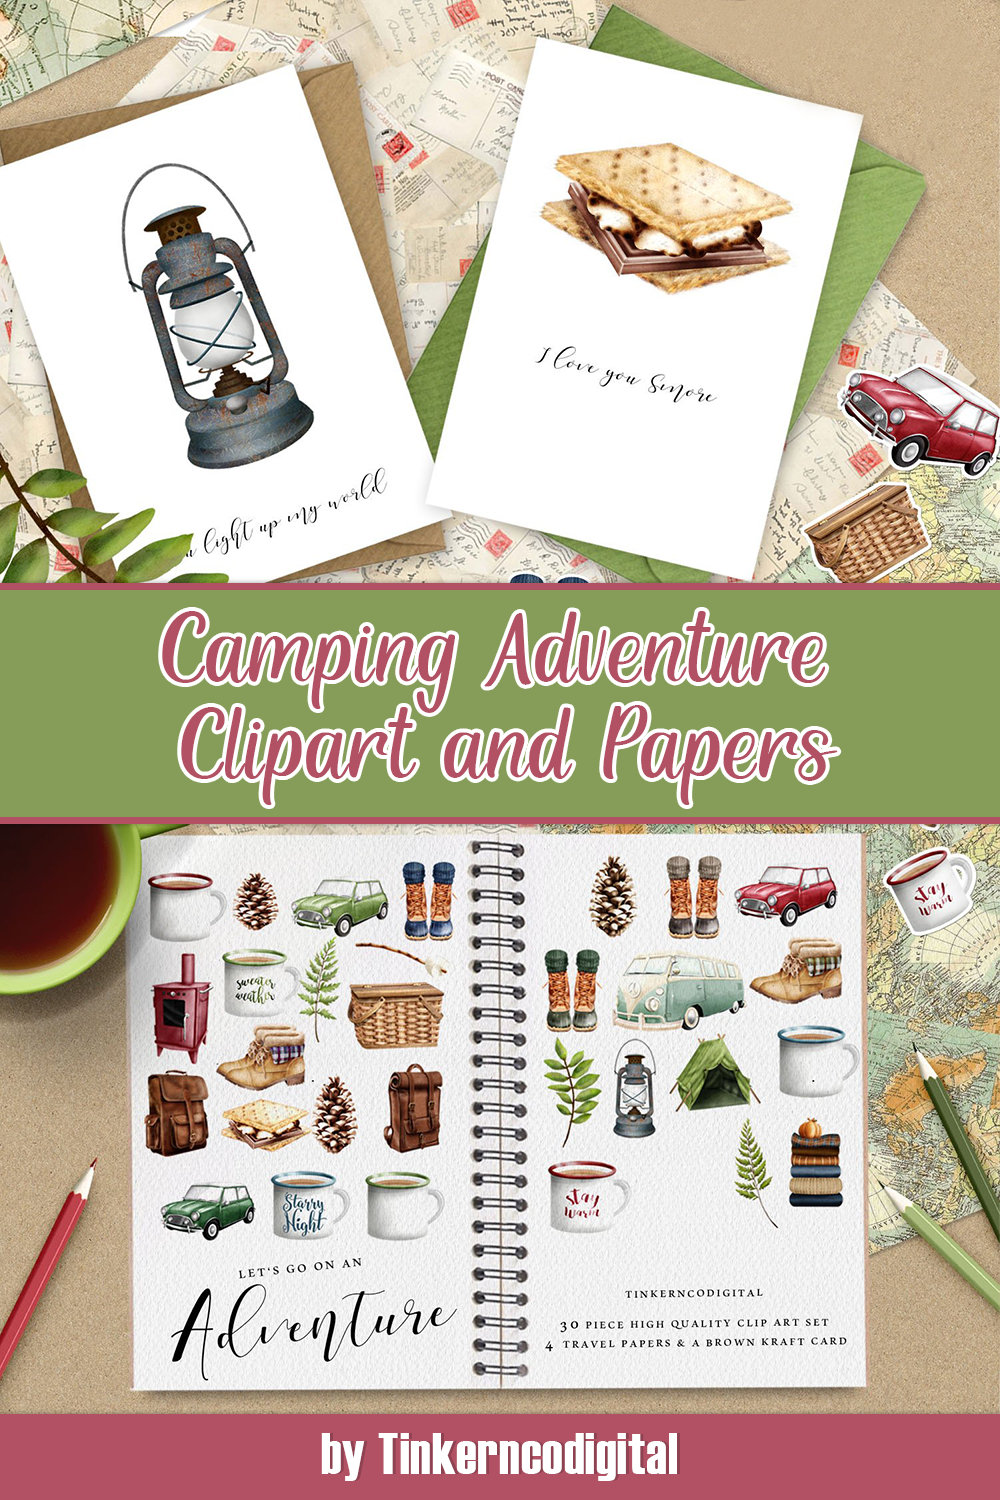 Camping adventure clipart and papers of pinterest.